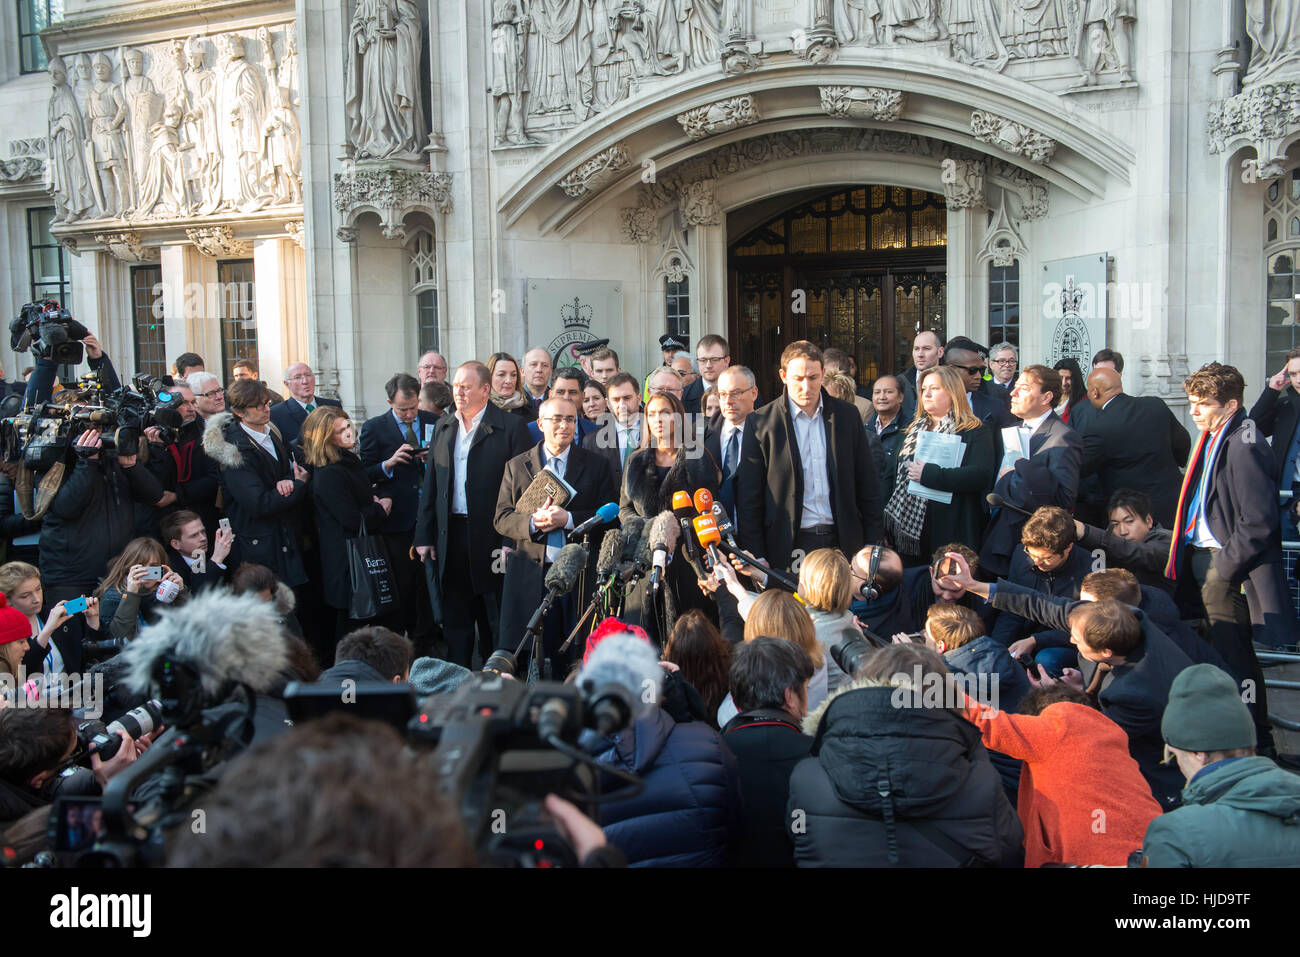 London, UK. 24th January 2017.Gina Miller speaking after the Supreme Court dismissed the government's appeal in a landmarkcase about Brexit, meaning Parliament will be required  to give its approval talks on leaving the EU. Michael Tubi/ Alamy Live News Stock Photo